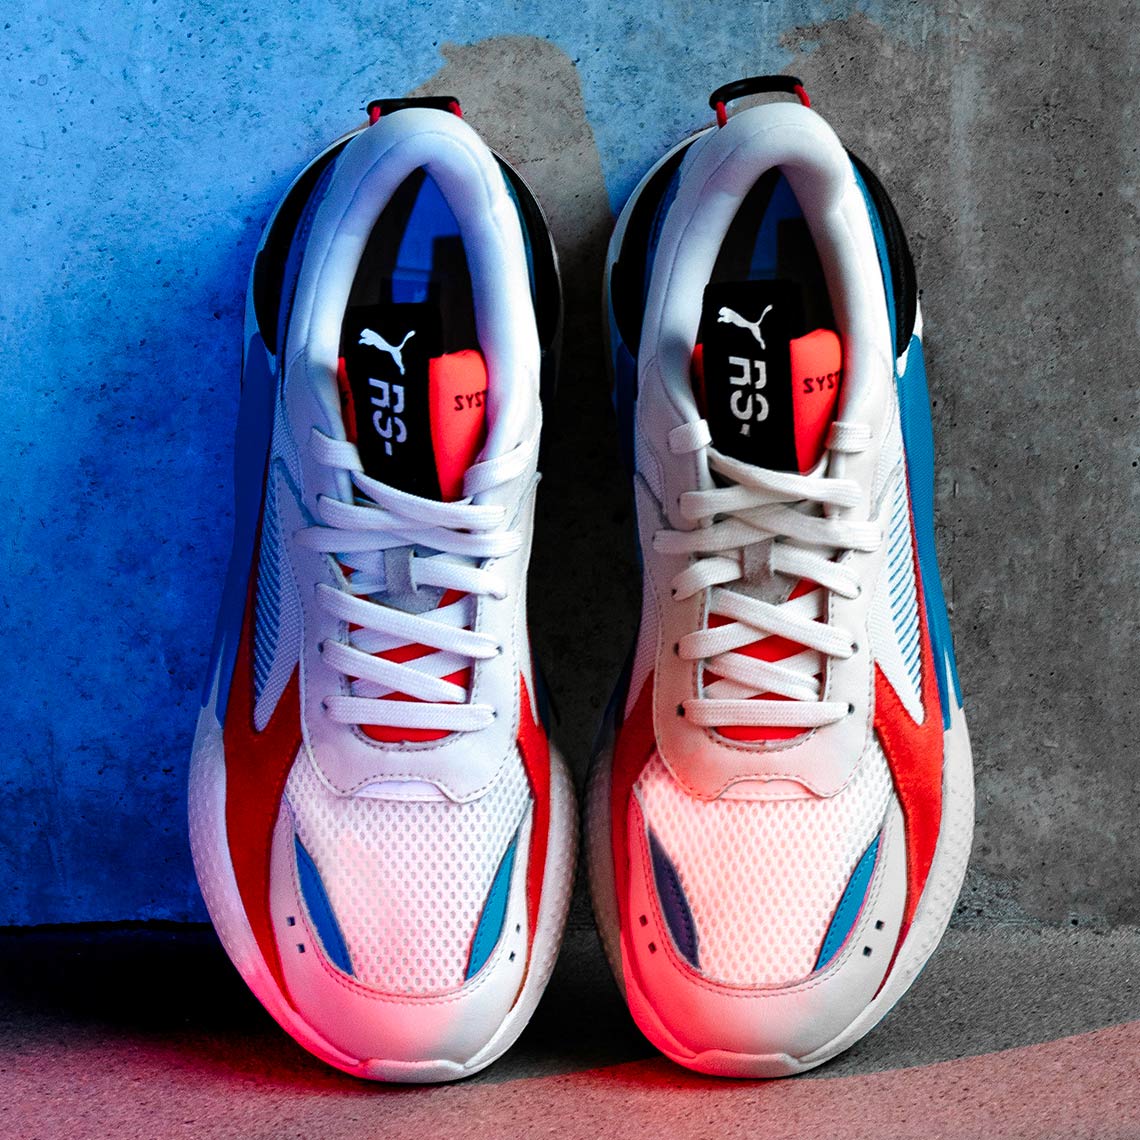 Puma Rs X Reinvention Red White Blue Release Date 5